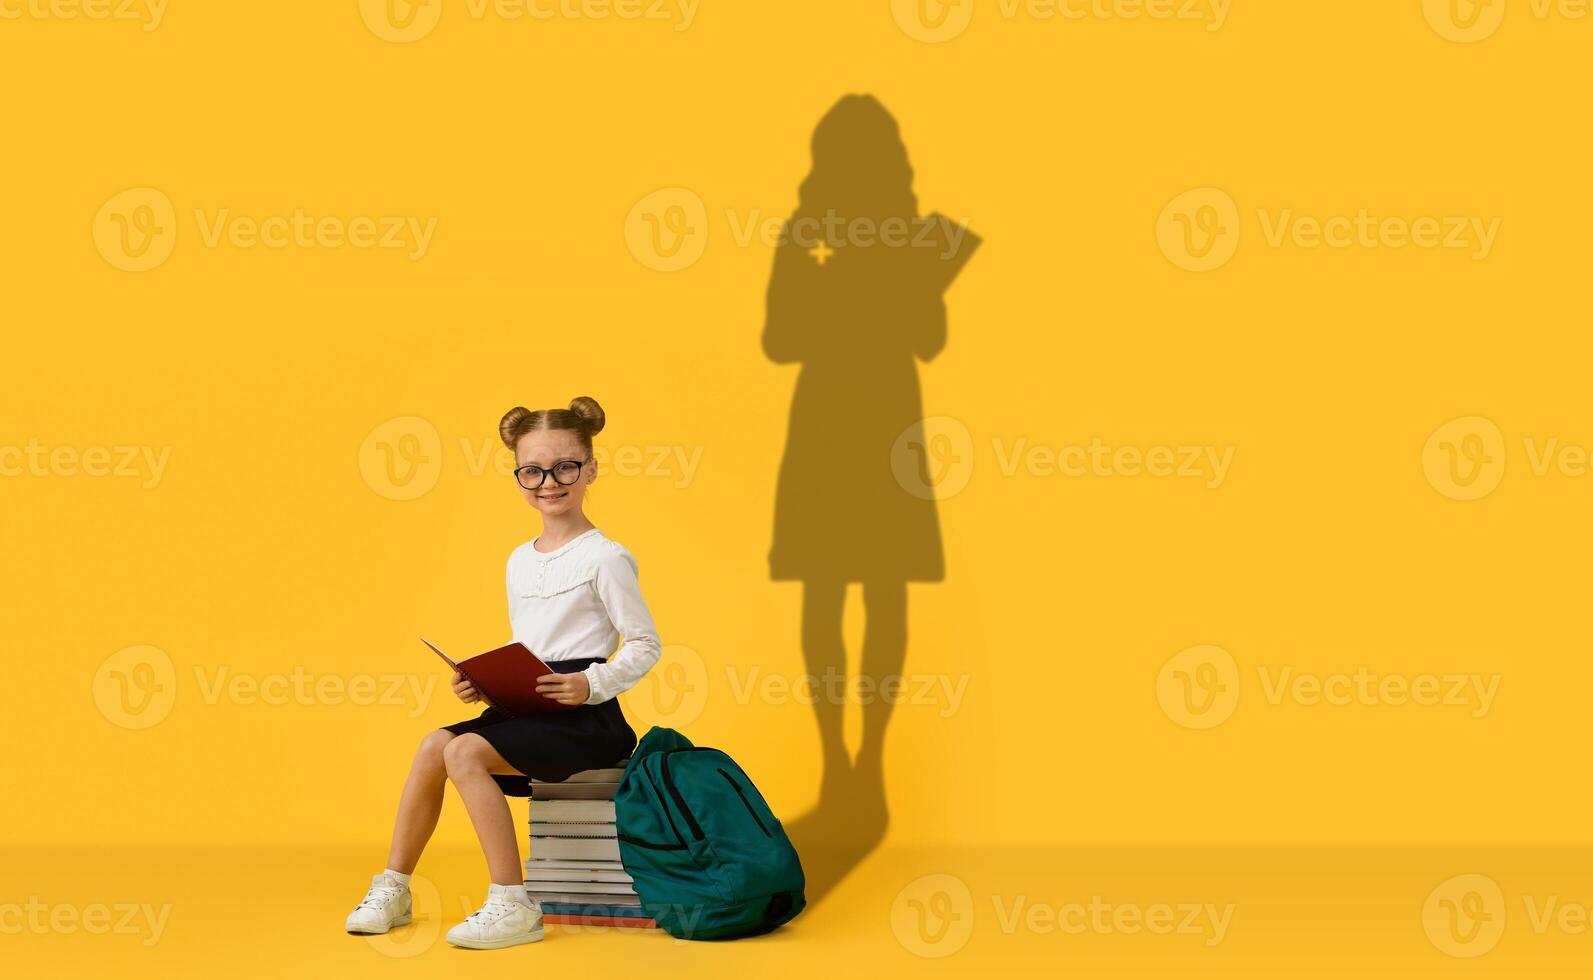 A young girl with glasses and hair in buns sits on a pile of books with a green backpack photo